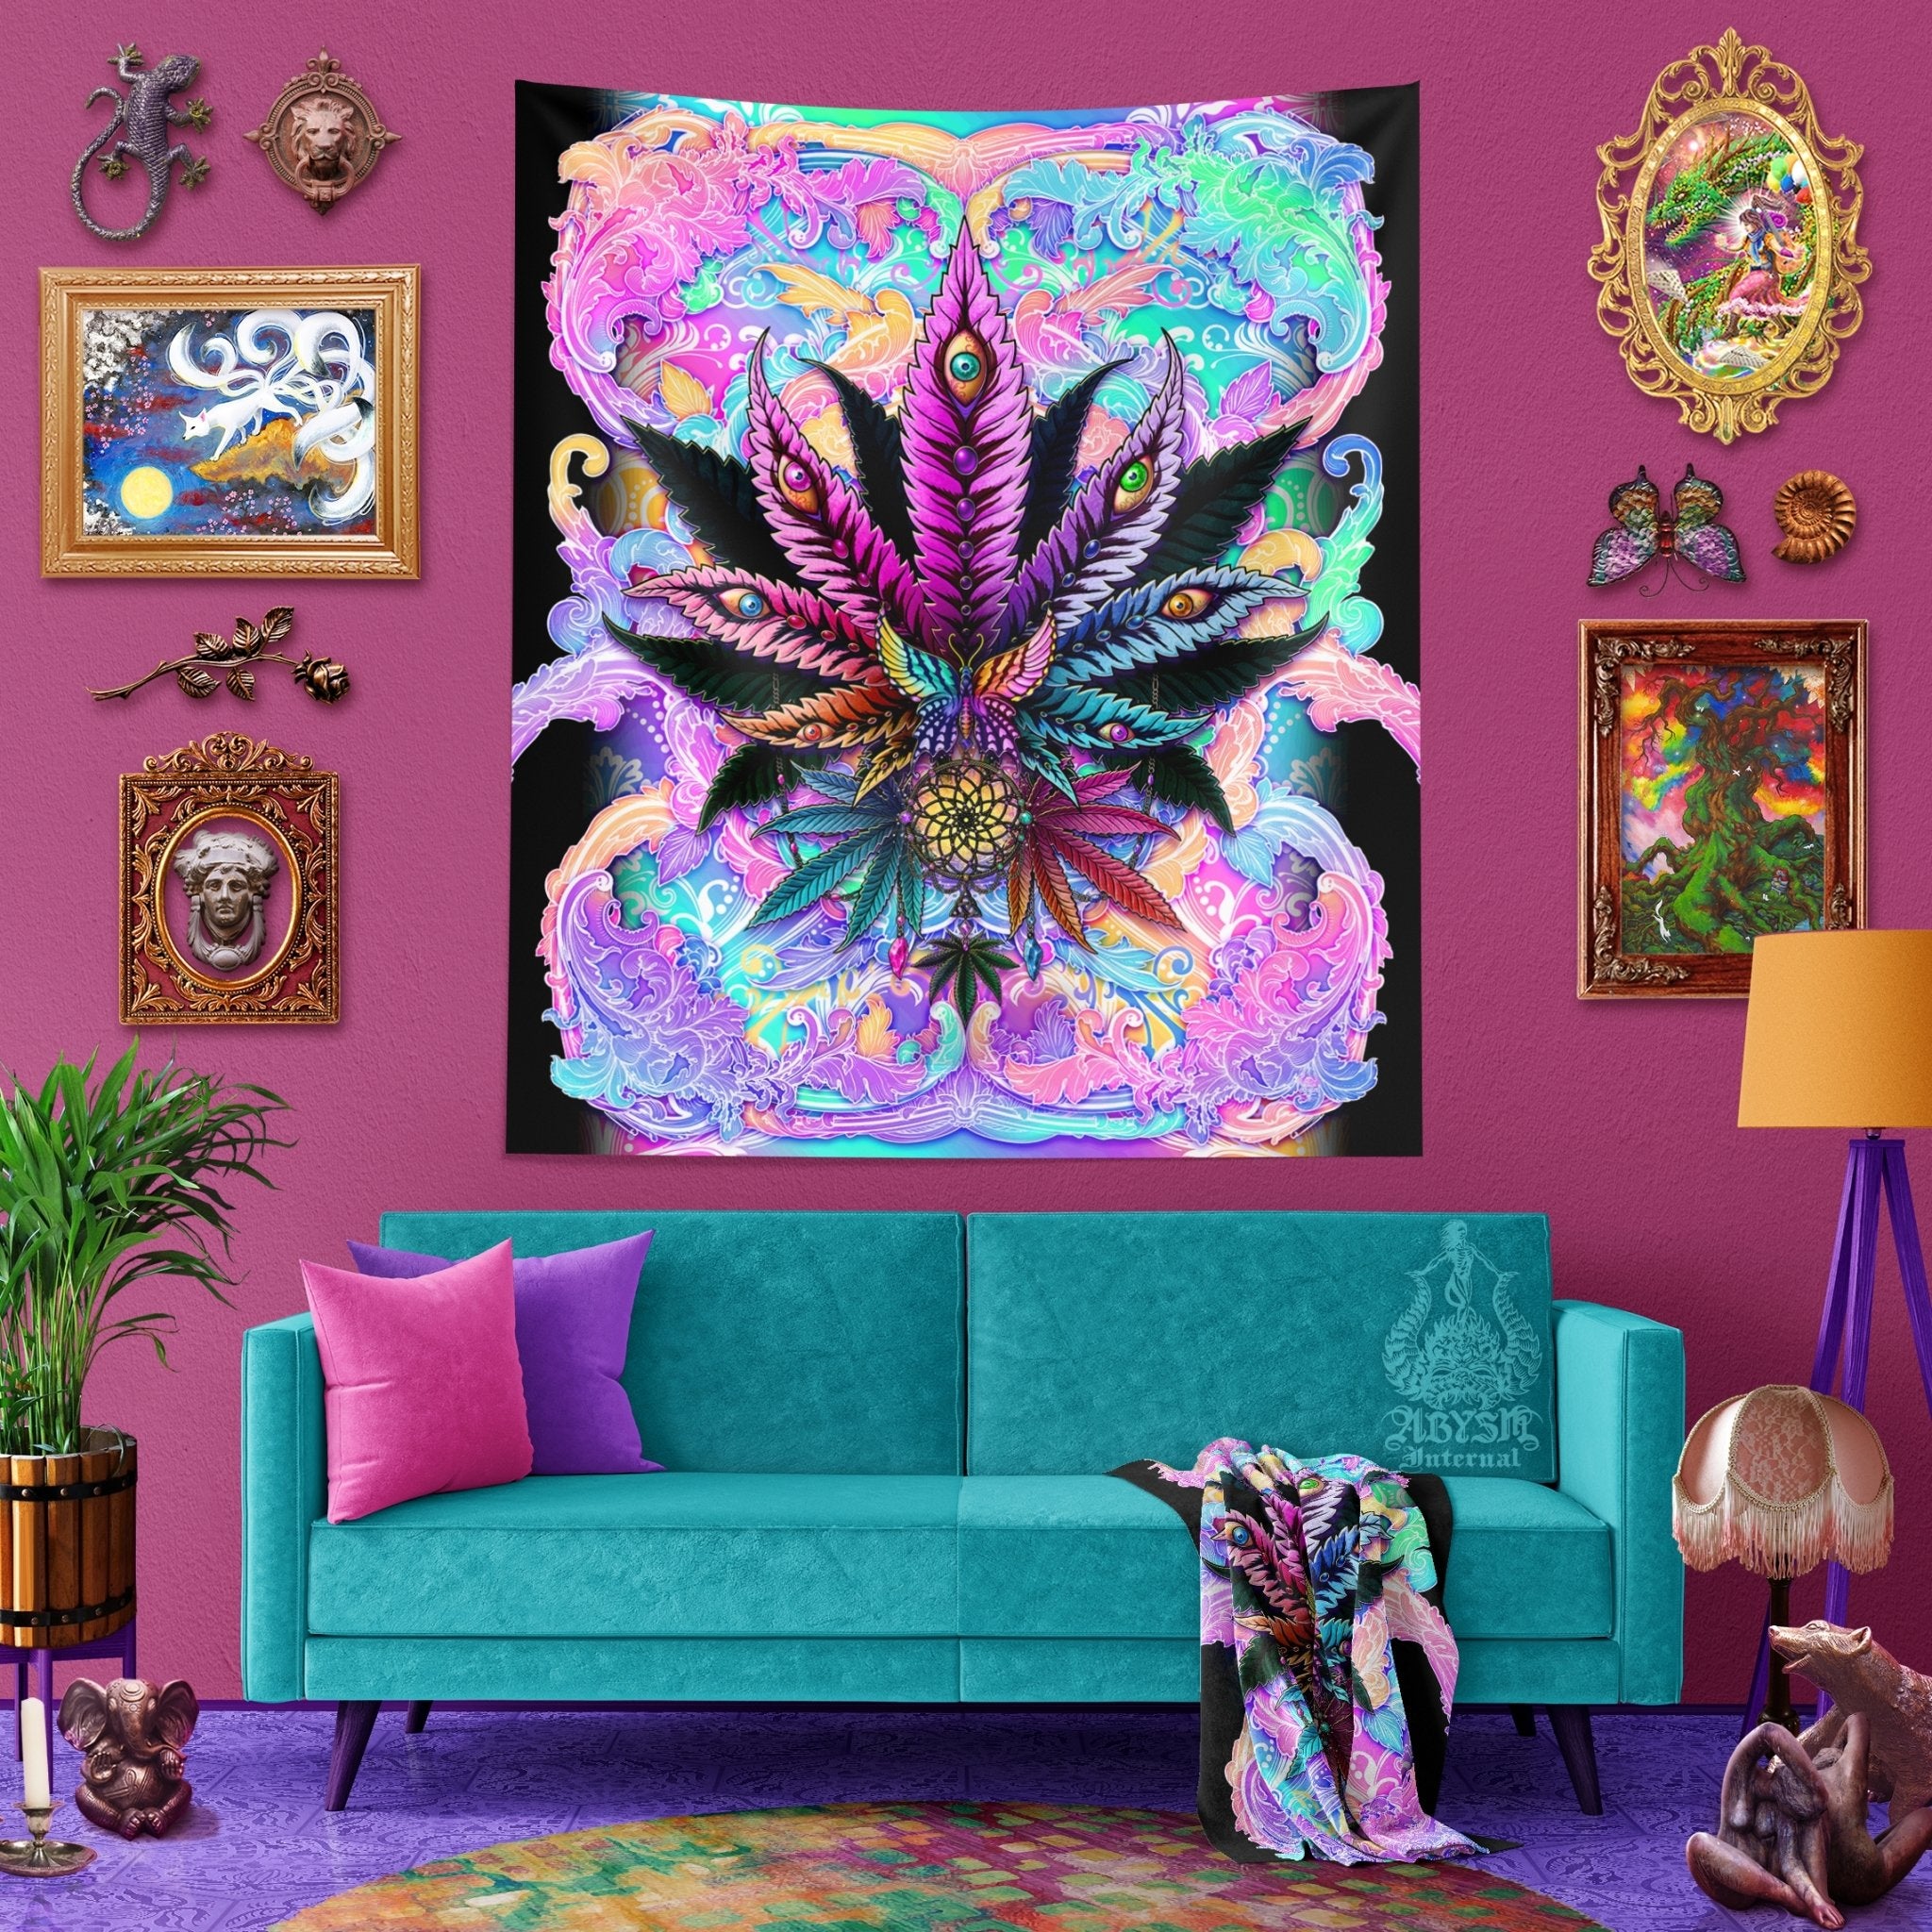 Weed Tapestry, Indie Cannabis Shop Decor, Marijuana Wall Hanging, Psychedelic Home Decor, Aesthetic Art Print, 420 Gift, Eclectic and Funky - Pastel Black - Abysm Internal